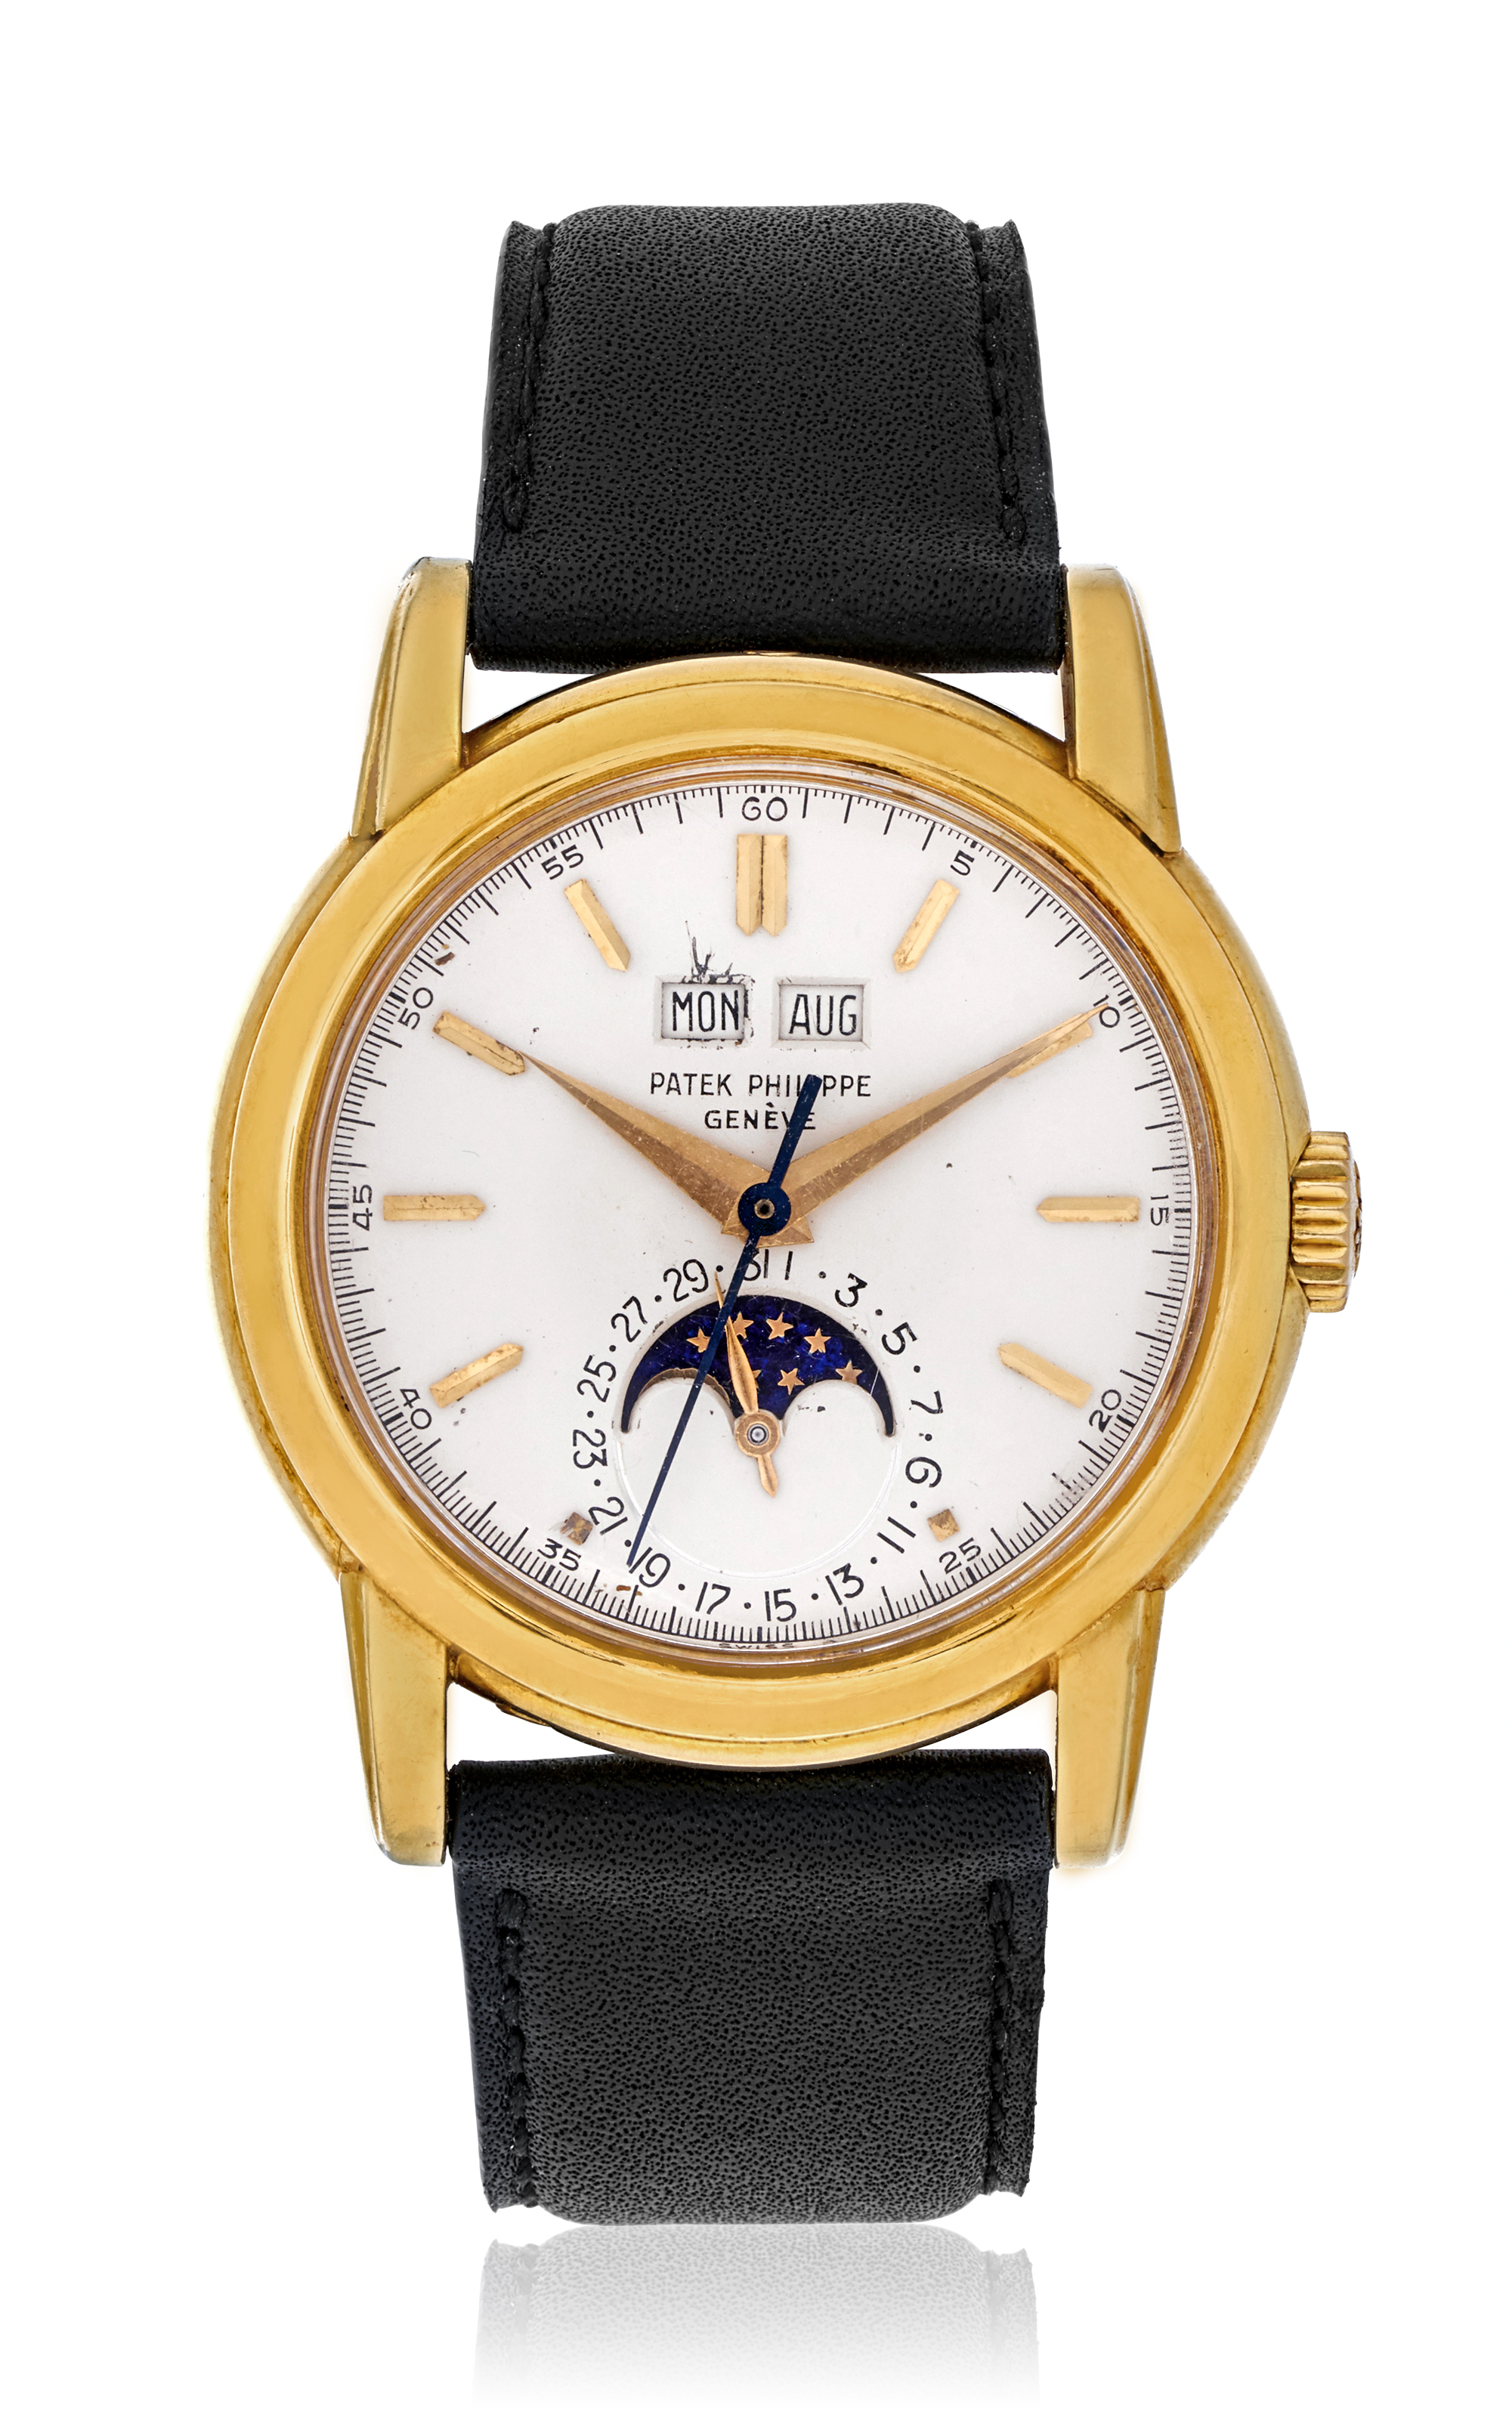 Patek Philippe, Perpetual Calendar, ref. 2438, Estimate 150,000 to 250,000 USD. This reference 2438 has an estimate of $150,000-250,000 with a start bid at $110,000. A very attractive price and model. This watch was recently discovered from an estate by a member of the original family. It’s a fresh to market piece in honest condition.